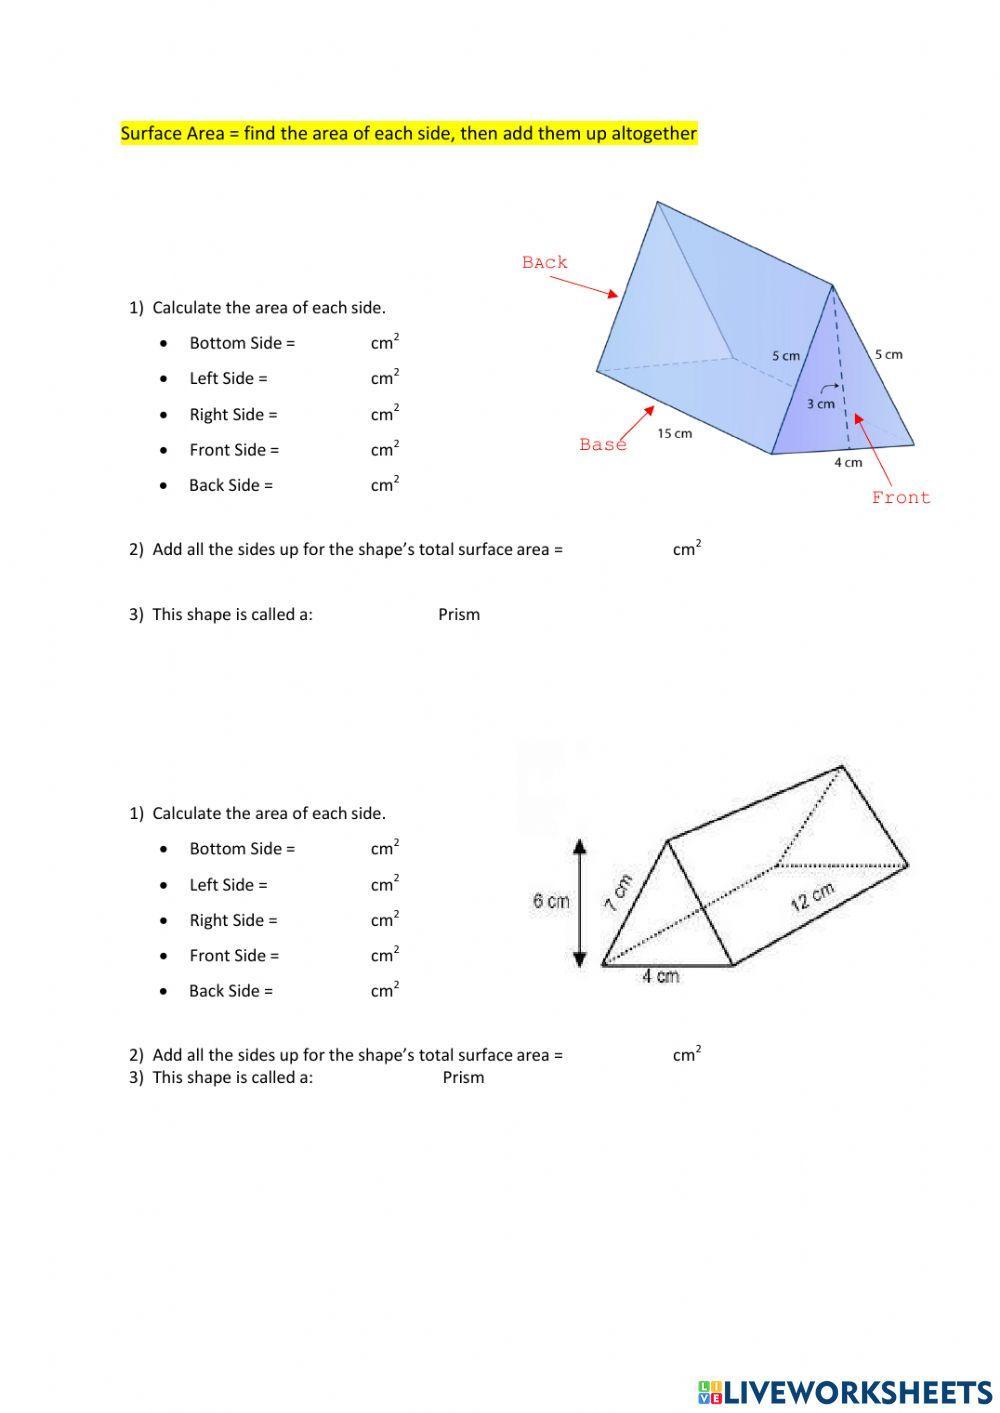 Surface Area of Triangular and Pentagonal Prism